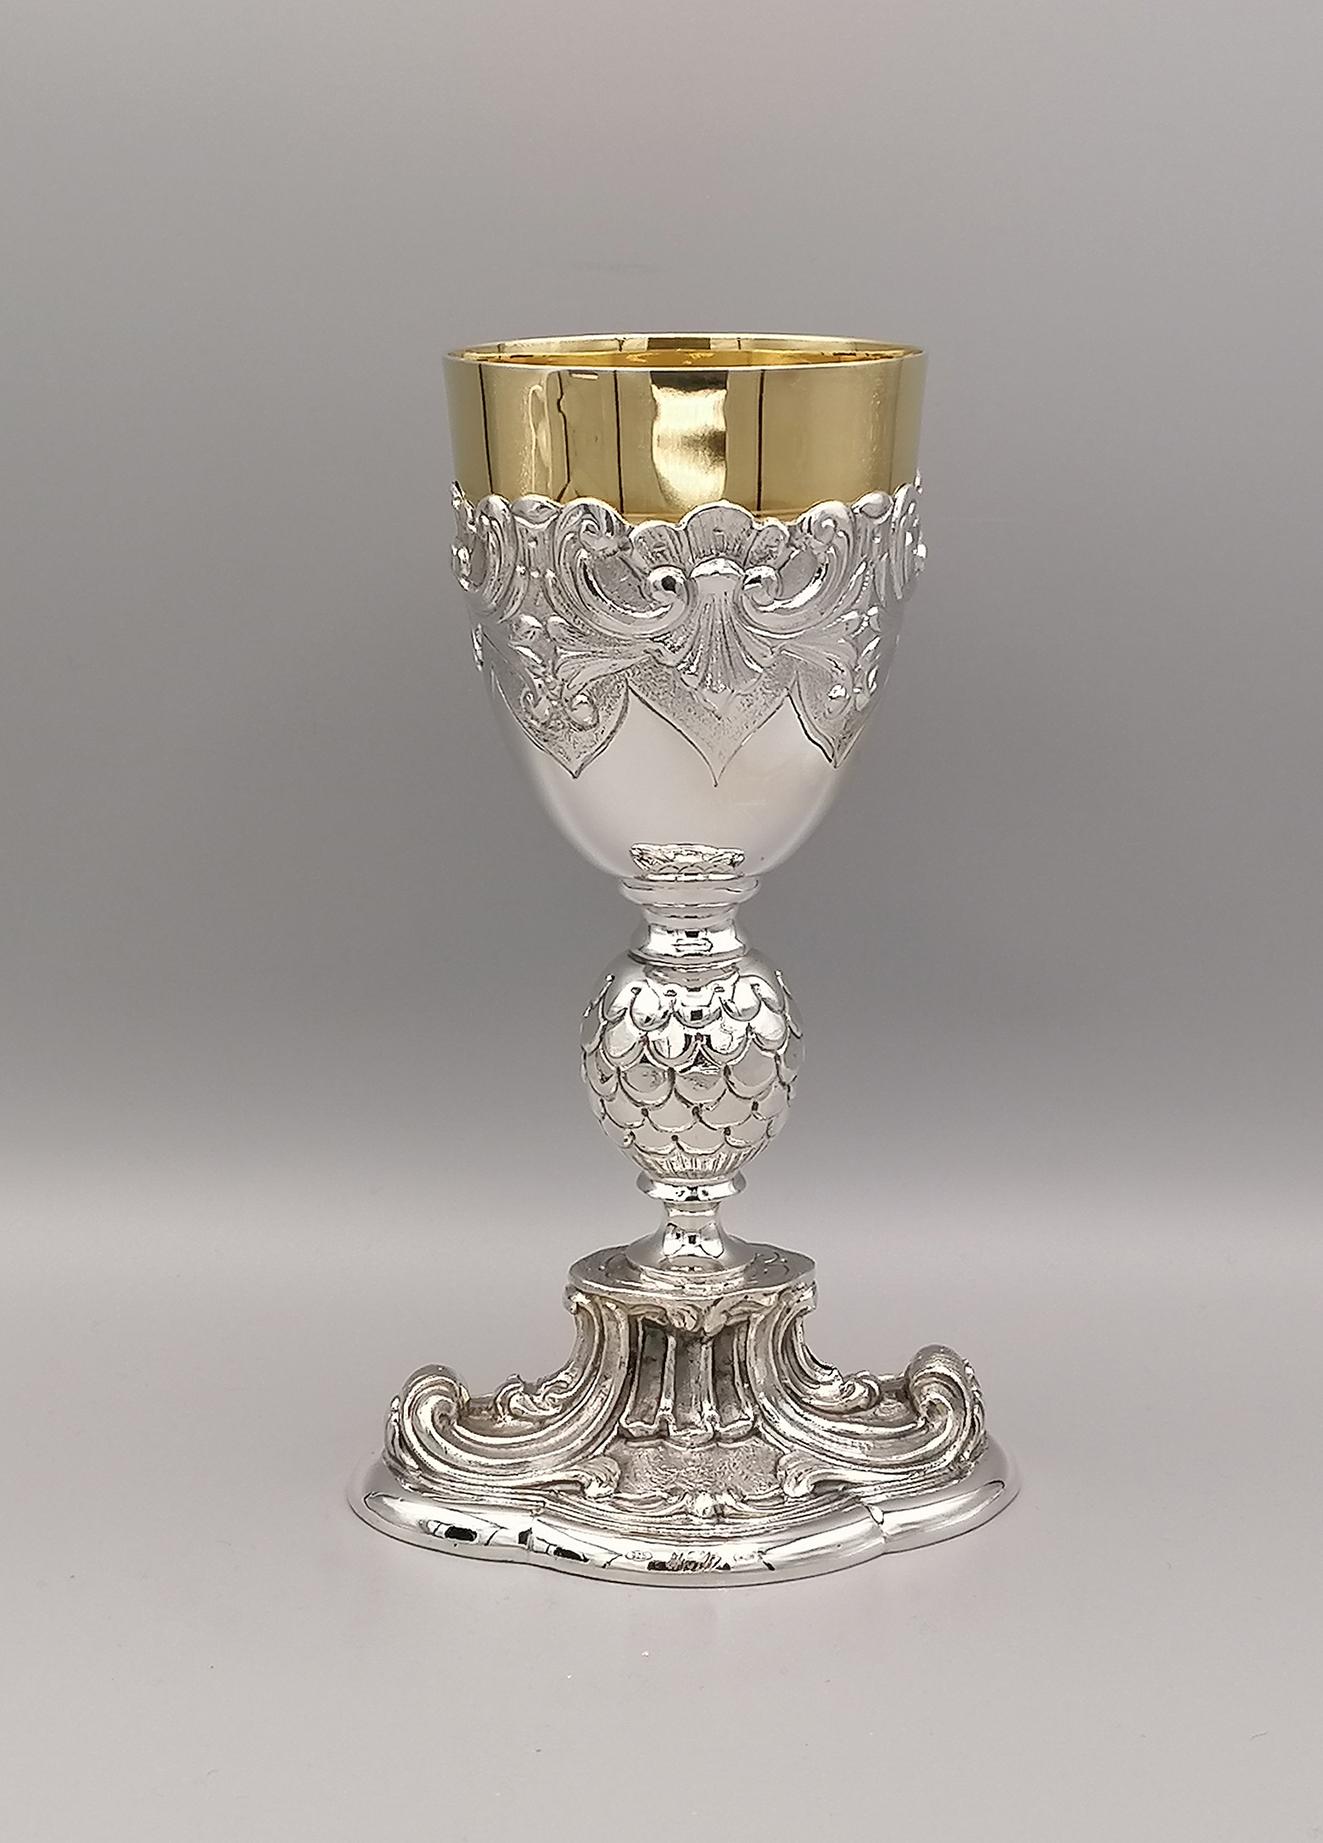 Ecclesiastical chalice in sterling silver in Baroque style. The shape is unusual, characterized by the oval cast base with volutes typical of the Baroque style.
The stem is also worked in fusion, while the golden cup is placed on another cup